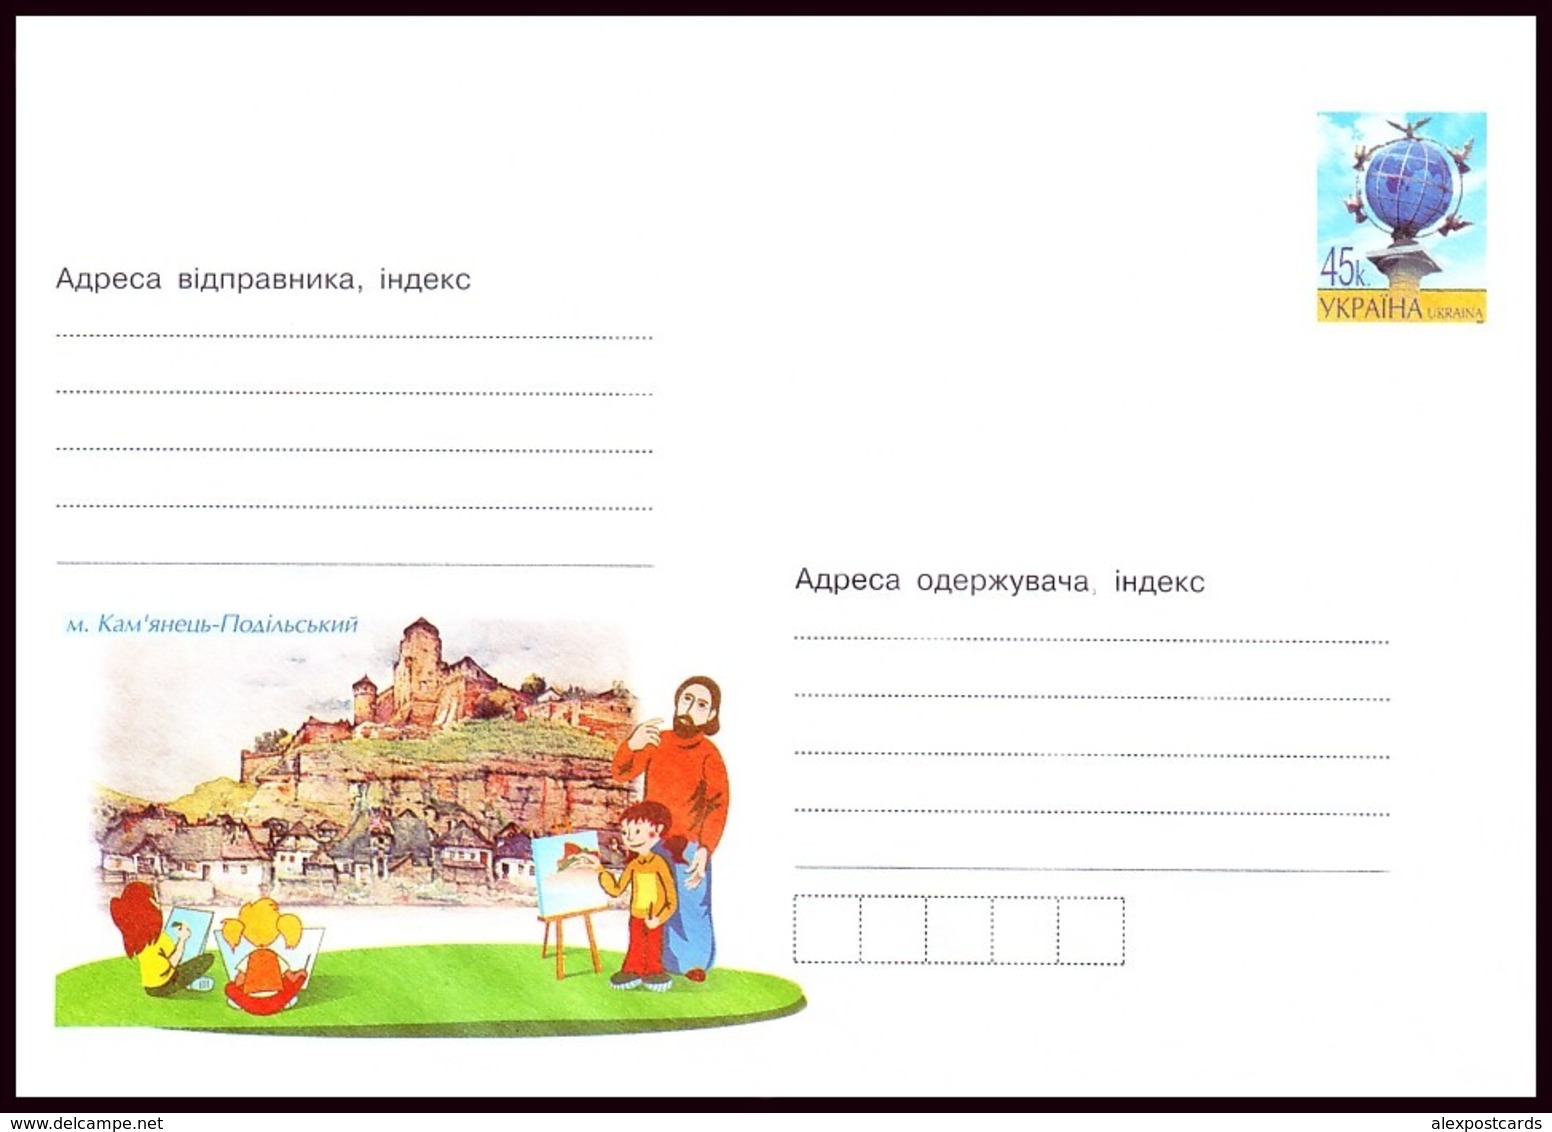 UKRAINE 2005. (5-3211) THE ANCIENT FORTRESS, KAMYANETS-PODILSKYI. CHILDREN DRAWING. Postal Stationery Stamped Cover (**) - Ukraine